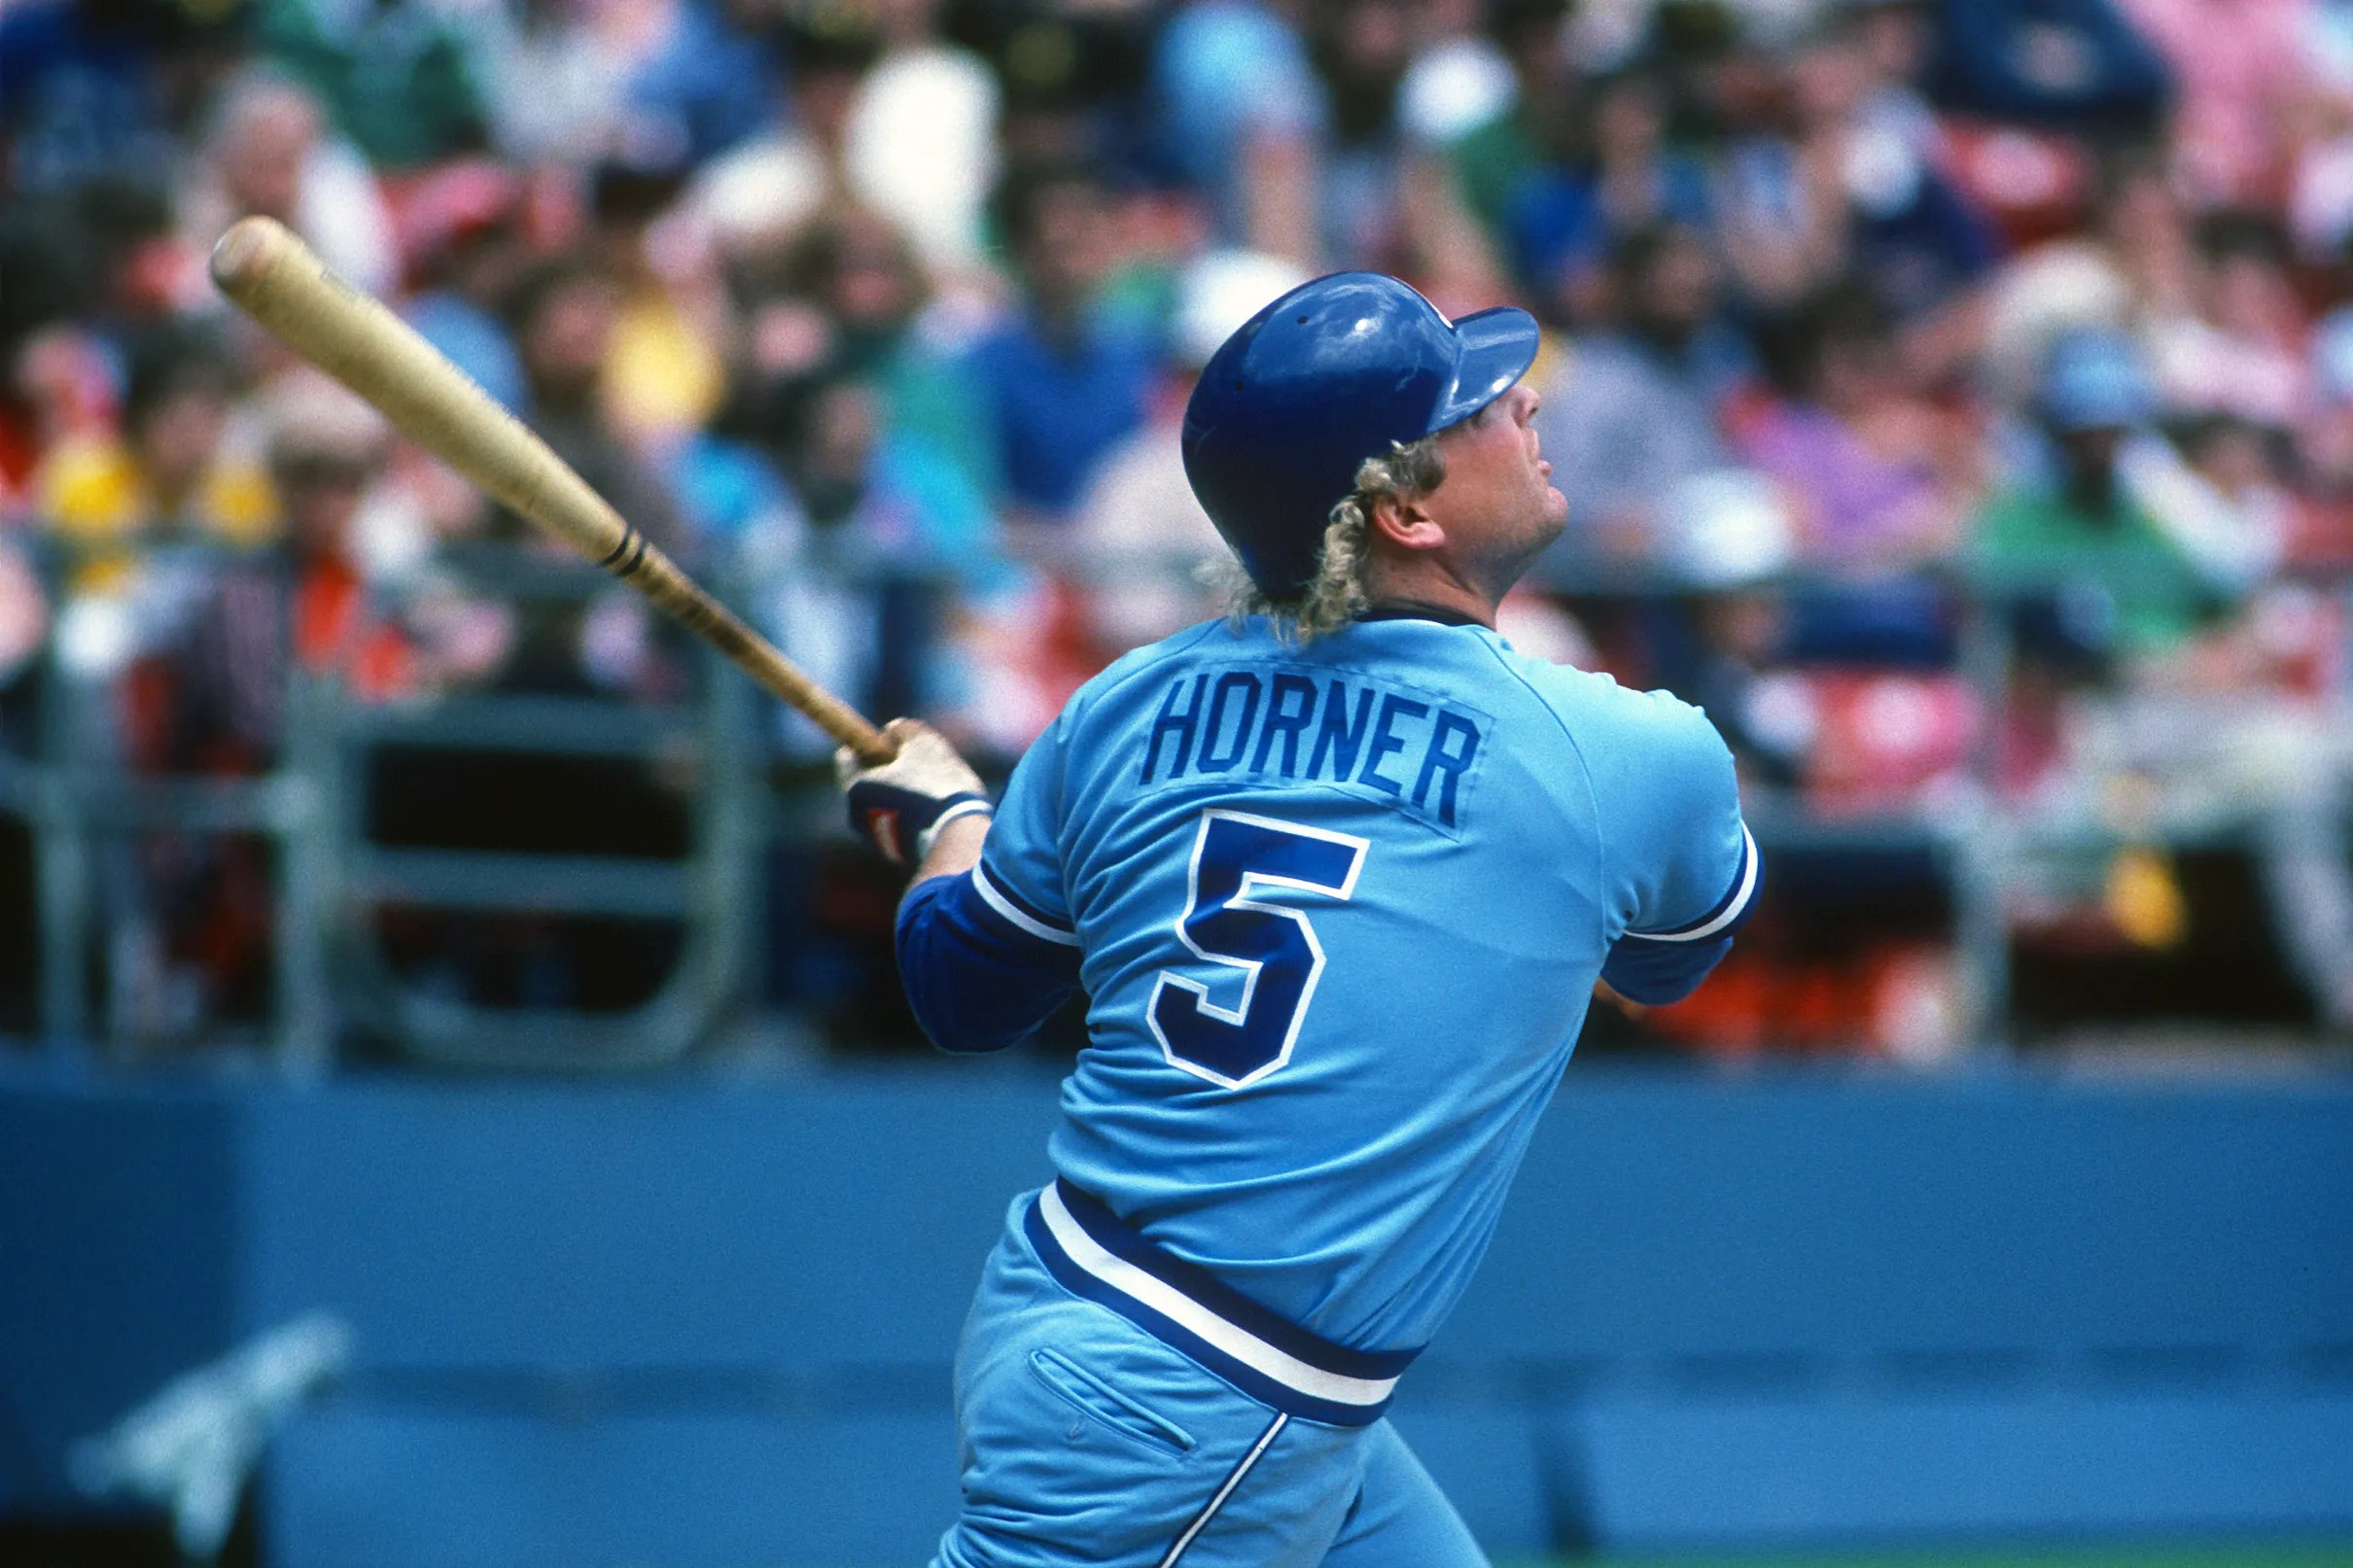 Bob Horner - 4 home runs in one game on July 6, 1986